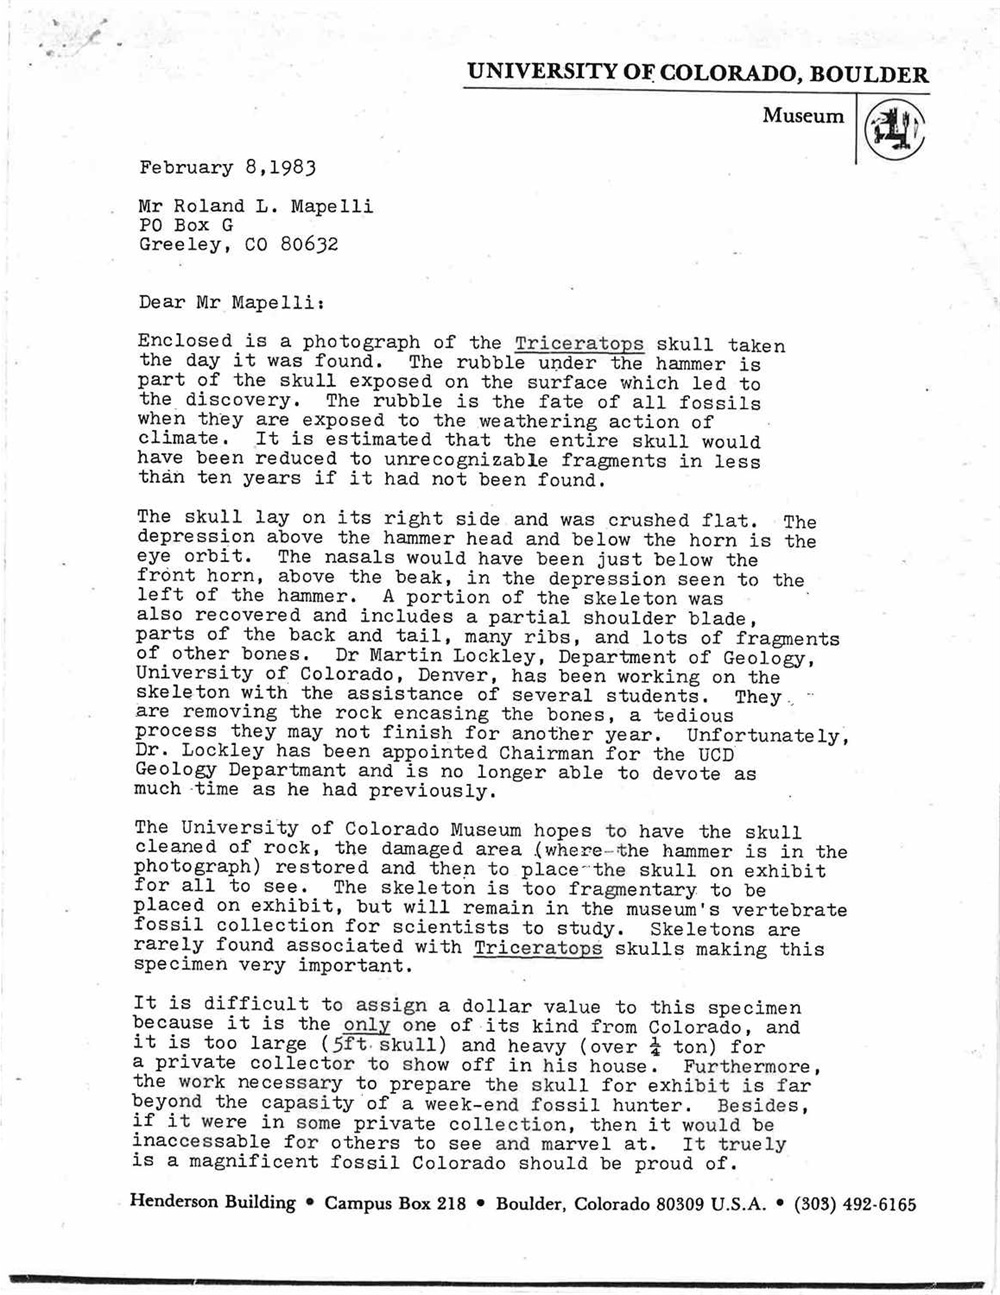 1983 Letter from Carpenter to Mapelli